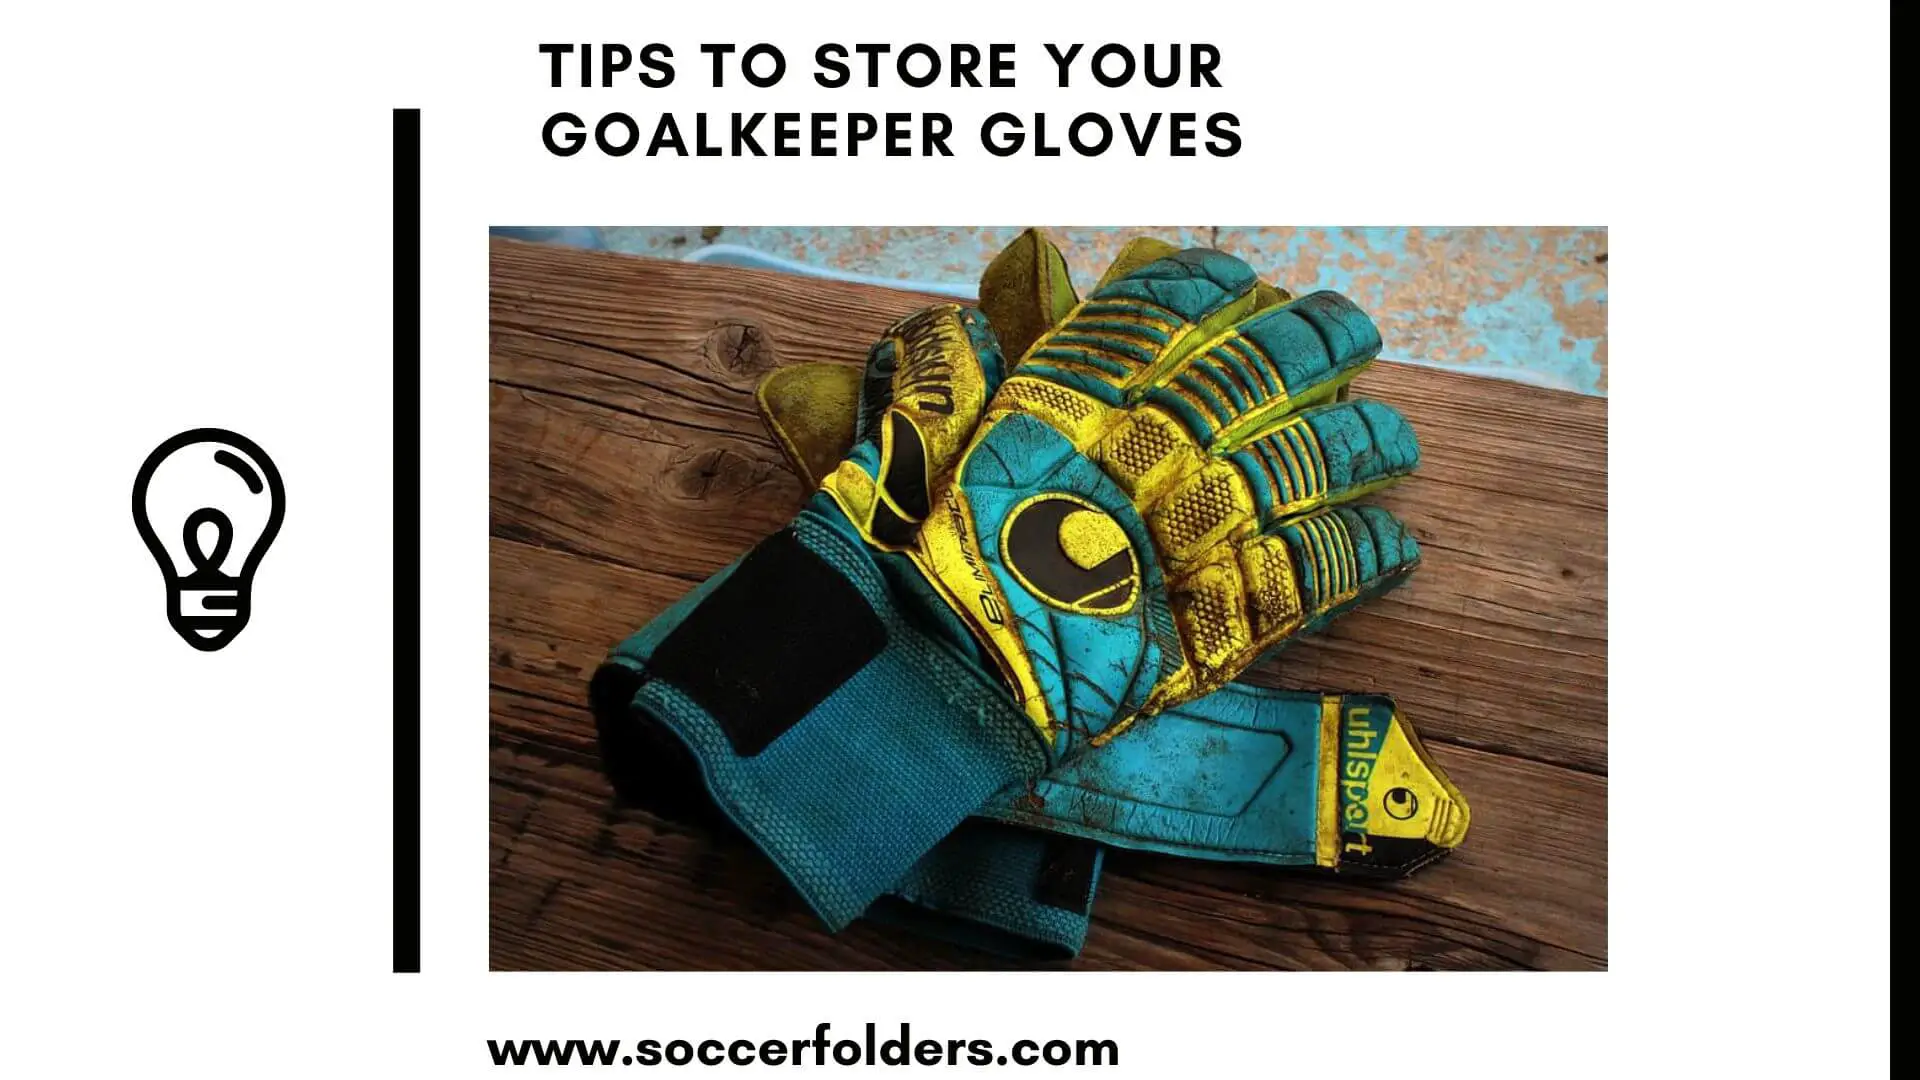 How do you keep goalkeeper gloves - Featured image